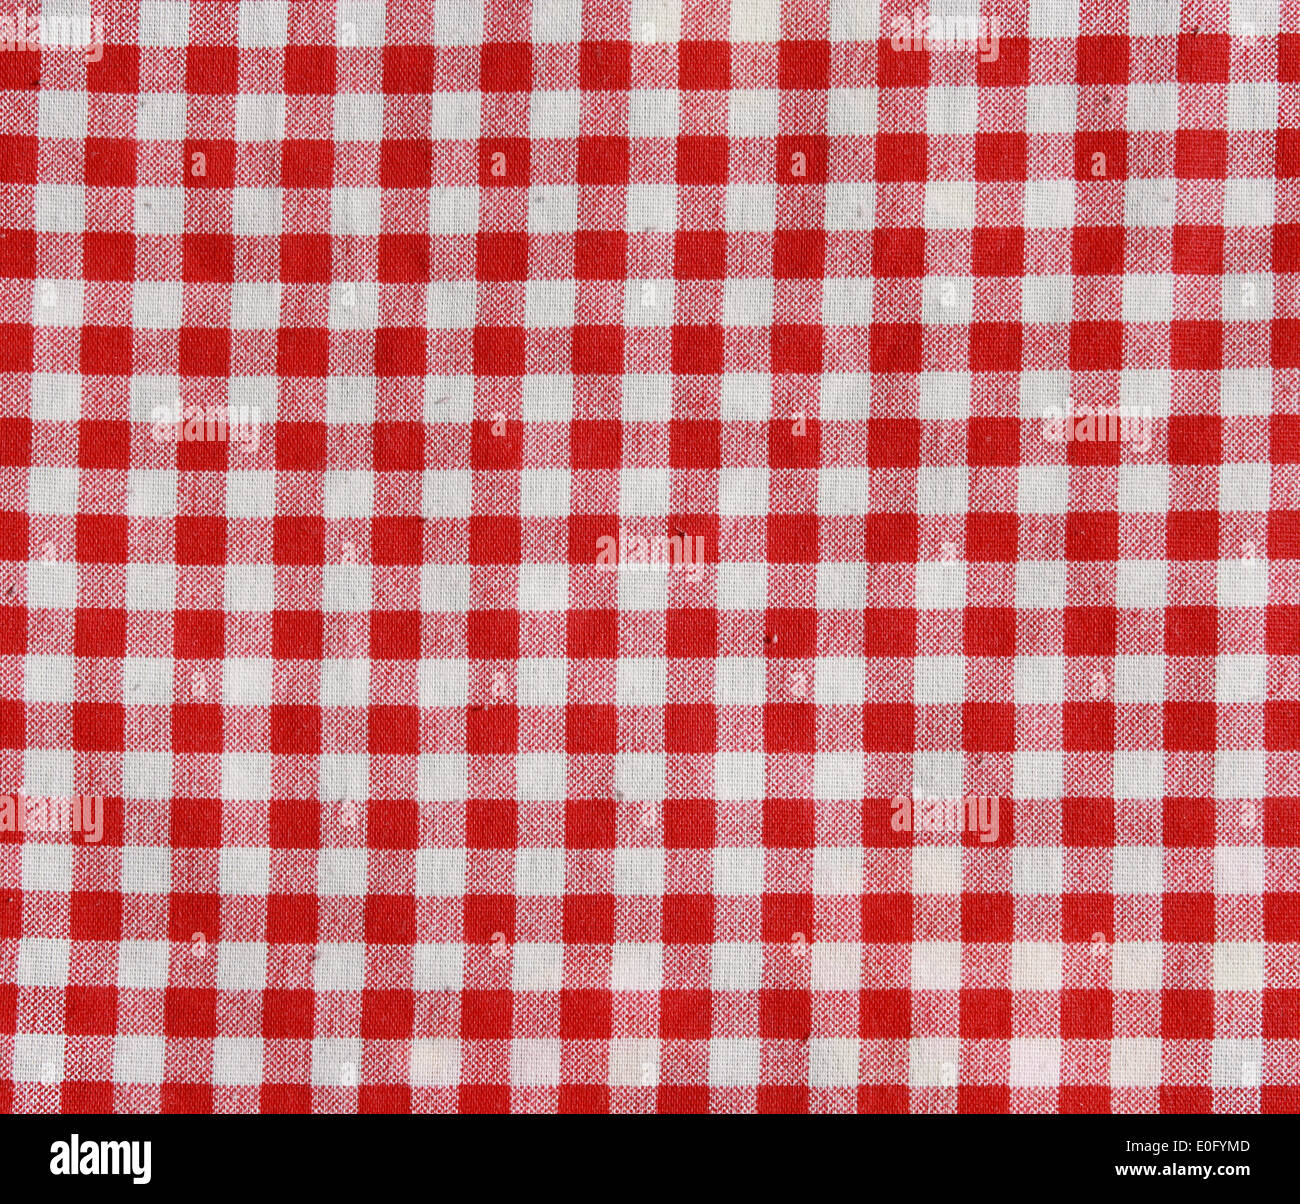 Texture of a red and white checkered picnic blanket. Red linen tablecloth. Stock Photo